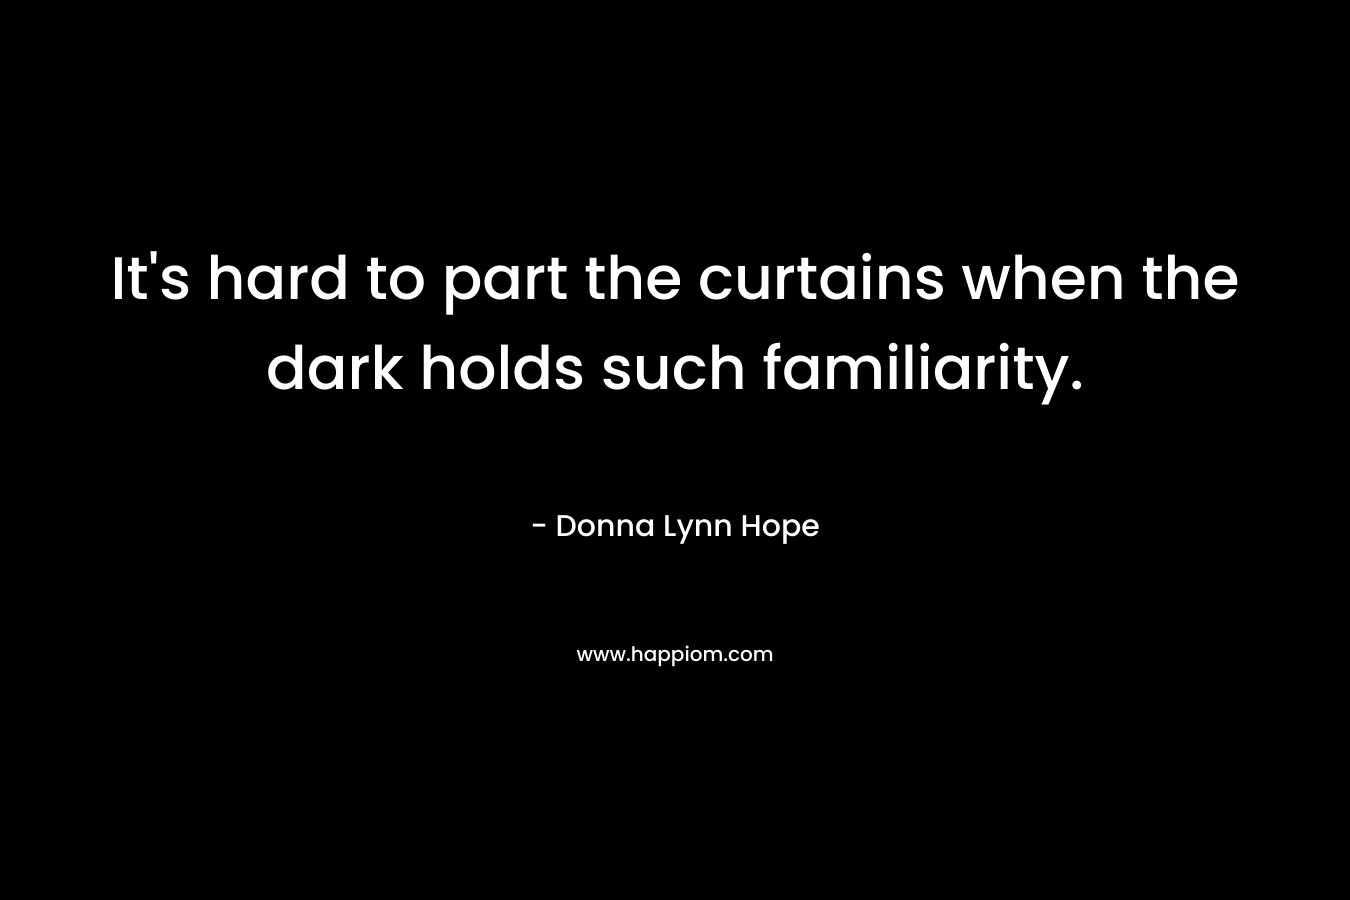 It's hard to part the curtains when the dark holds such familiarity.